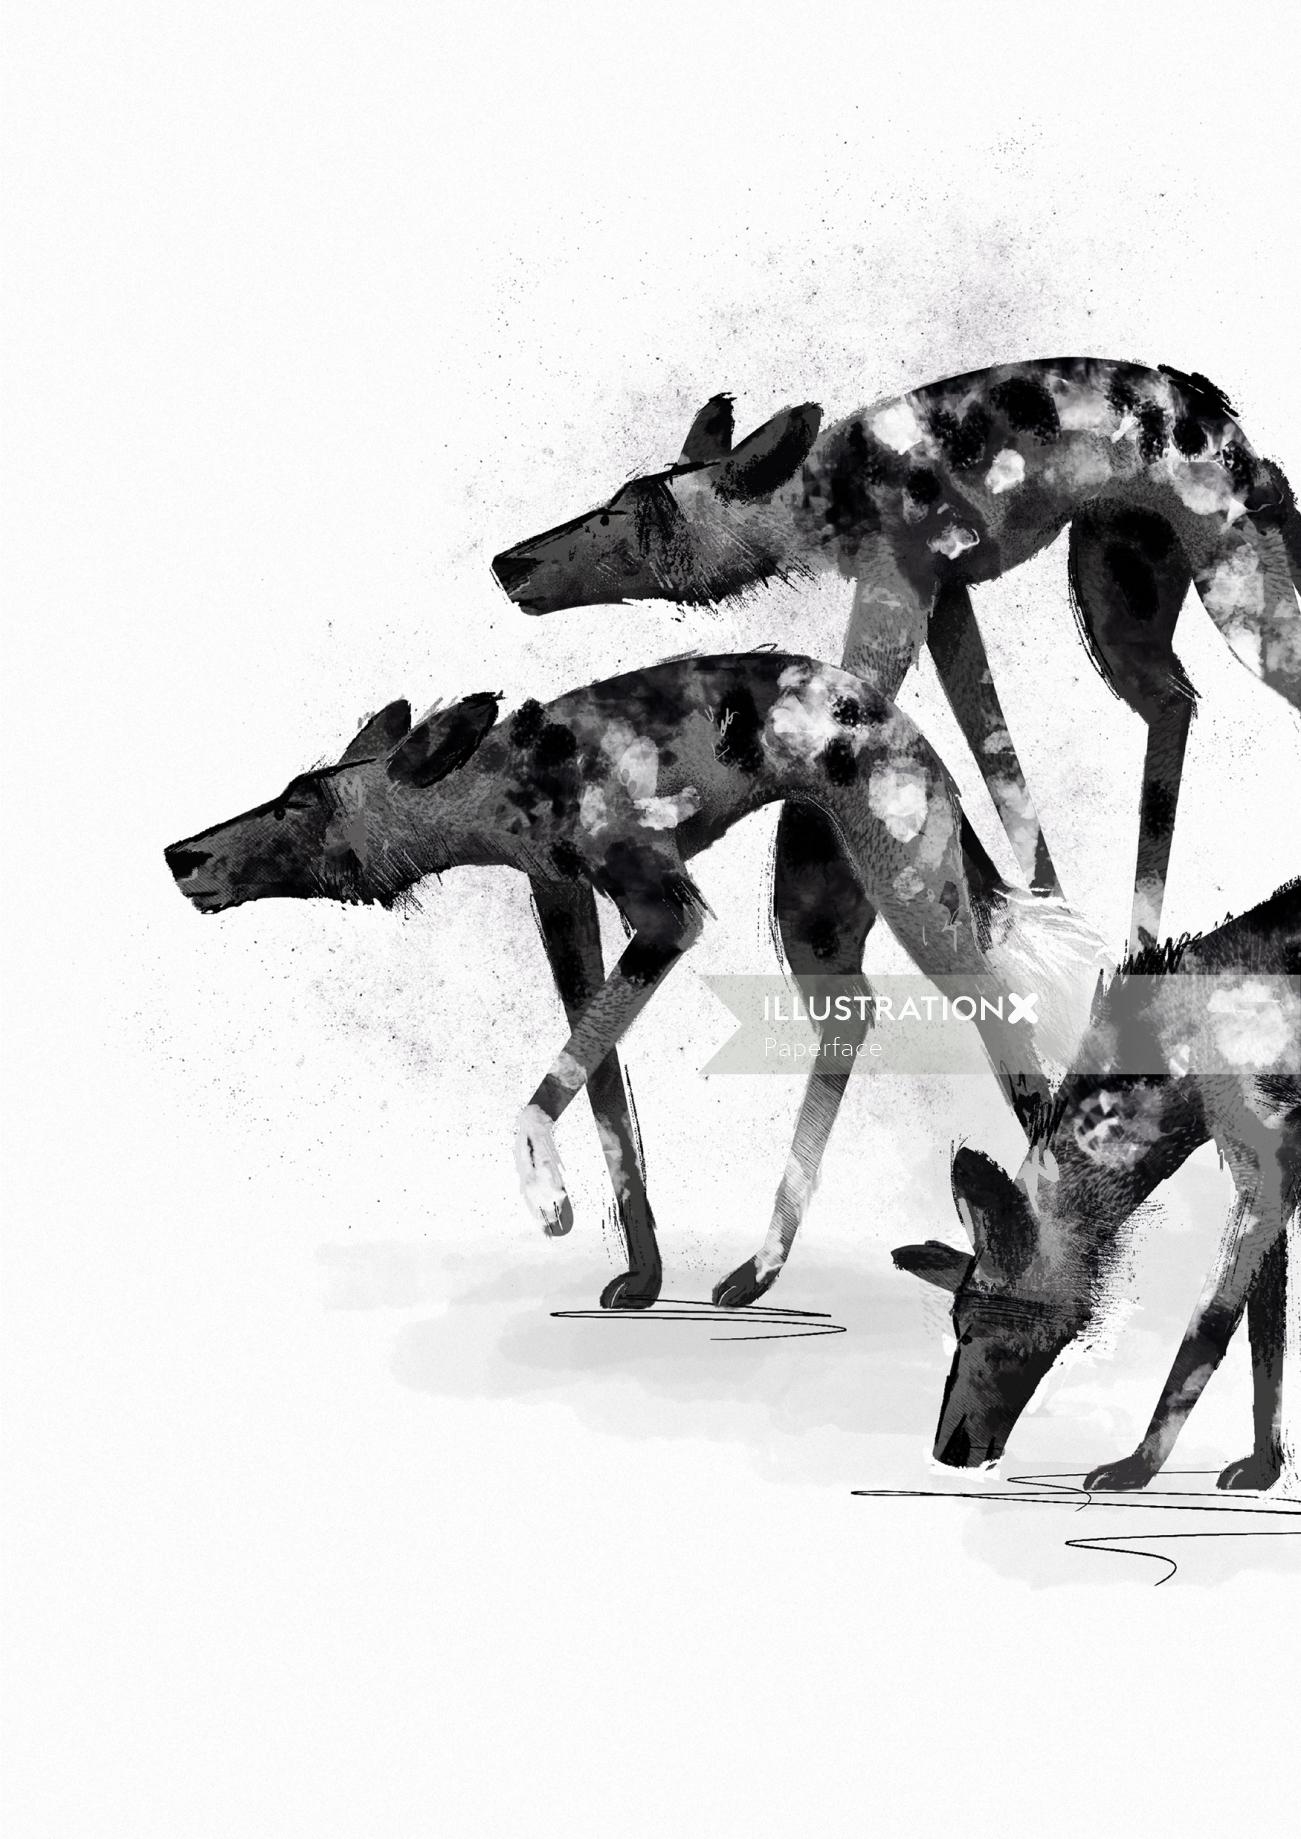 Black and white drawing of wolfs by Paperface